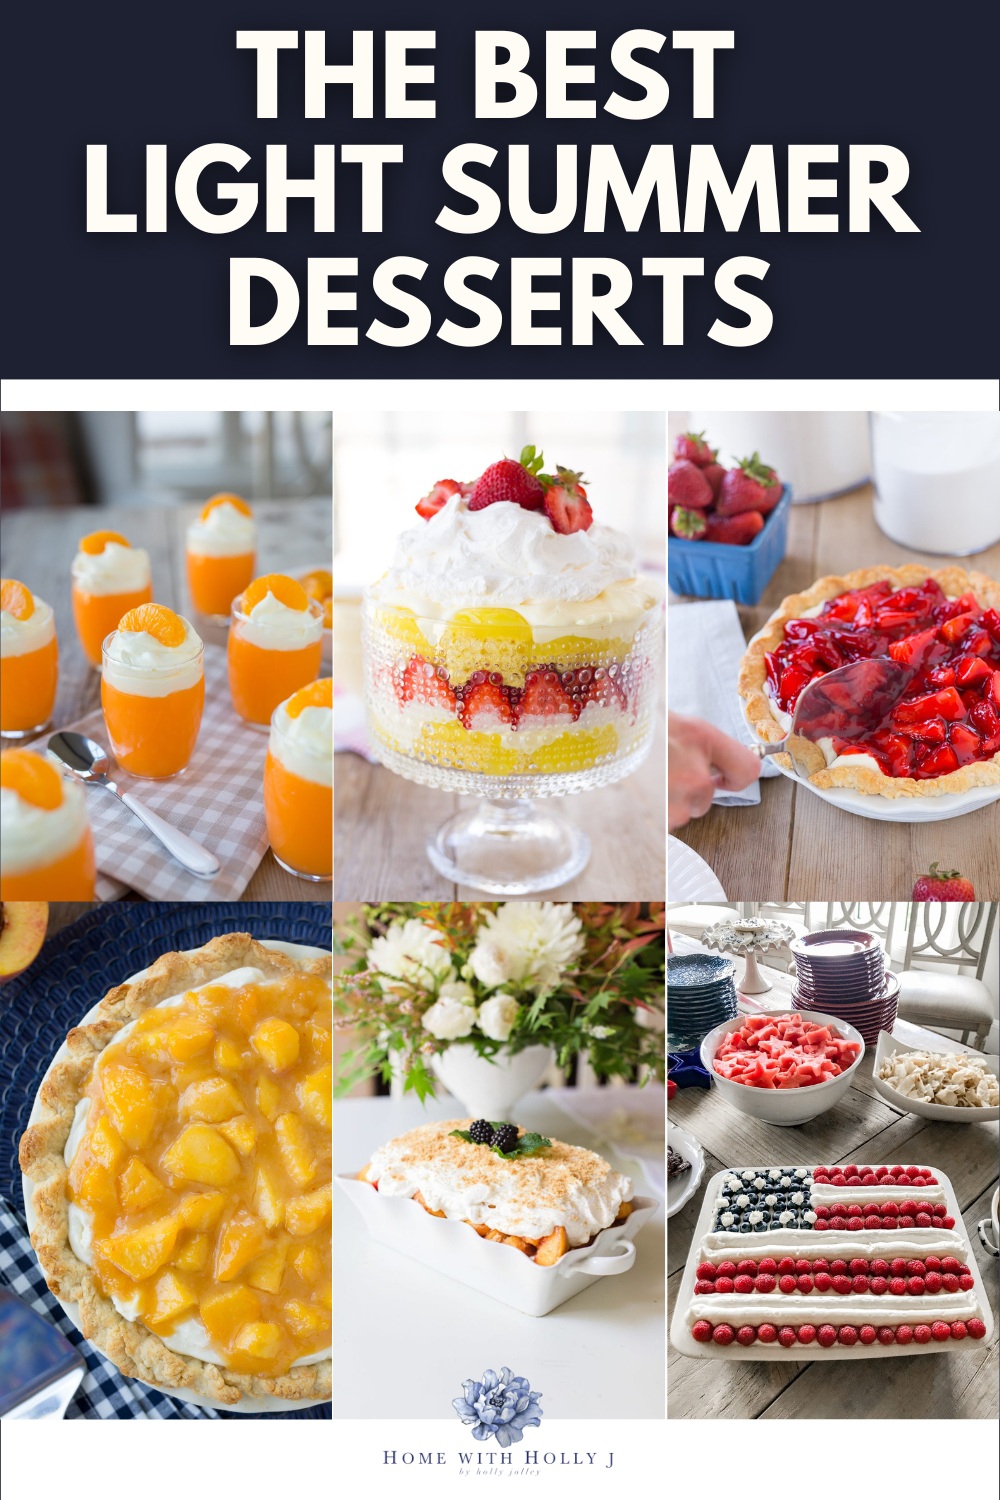 Satisfy your sweet tooth with these light desserts. Explore a variety of delightful recipes that are perfect for Summer.